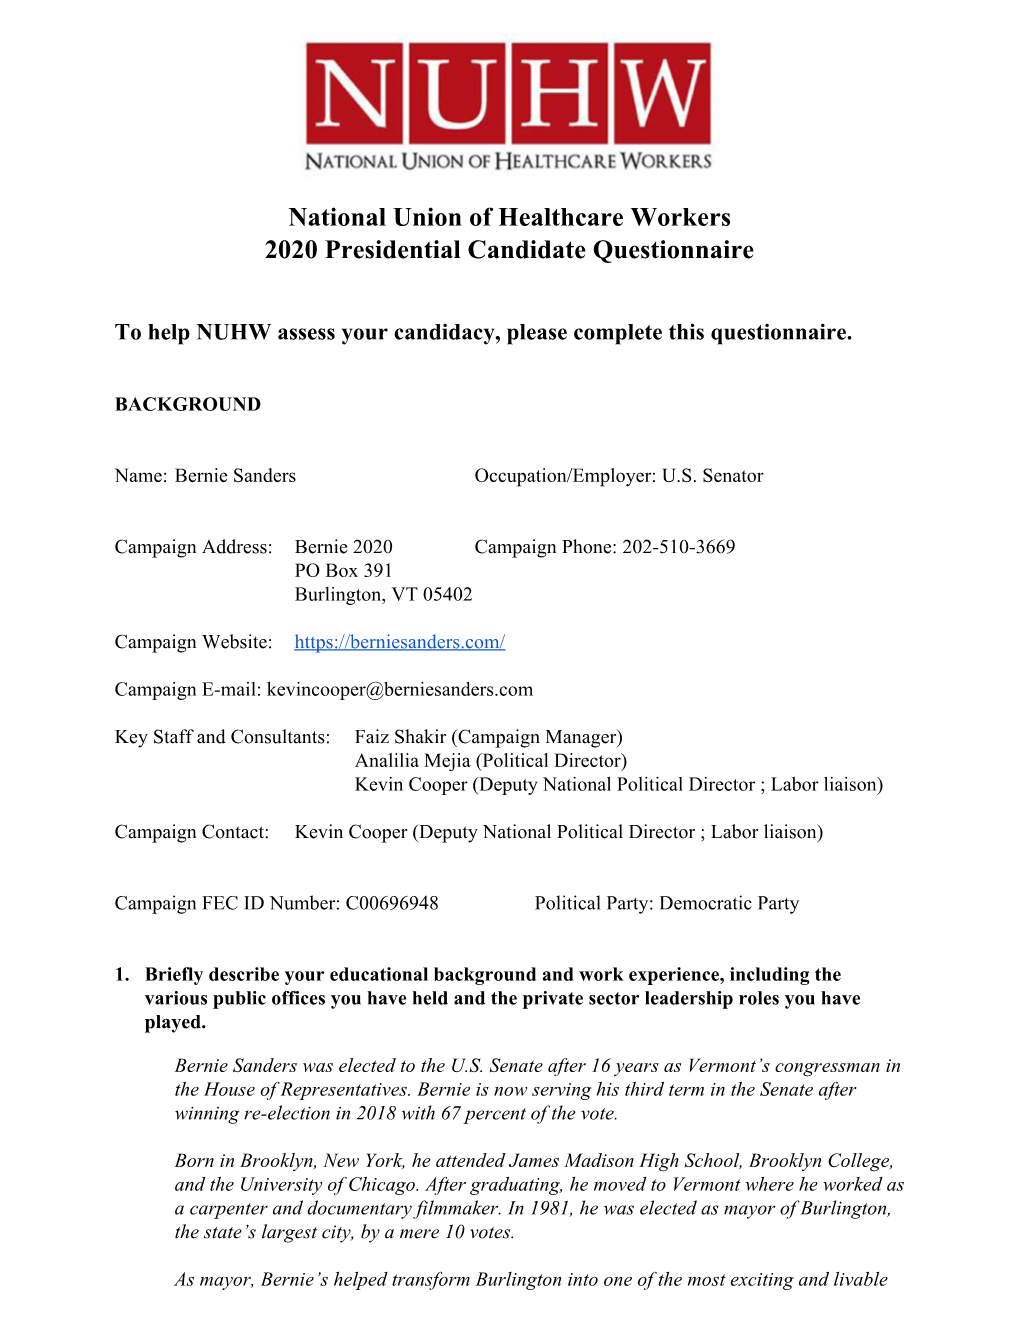 National Union of Healthcare Workers 2020 Presidential Candidate Questionnaire